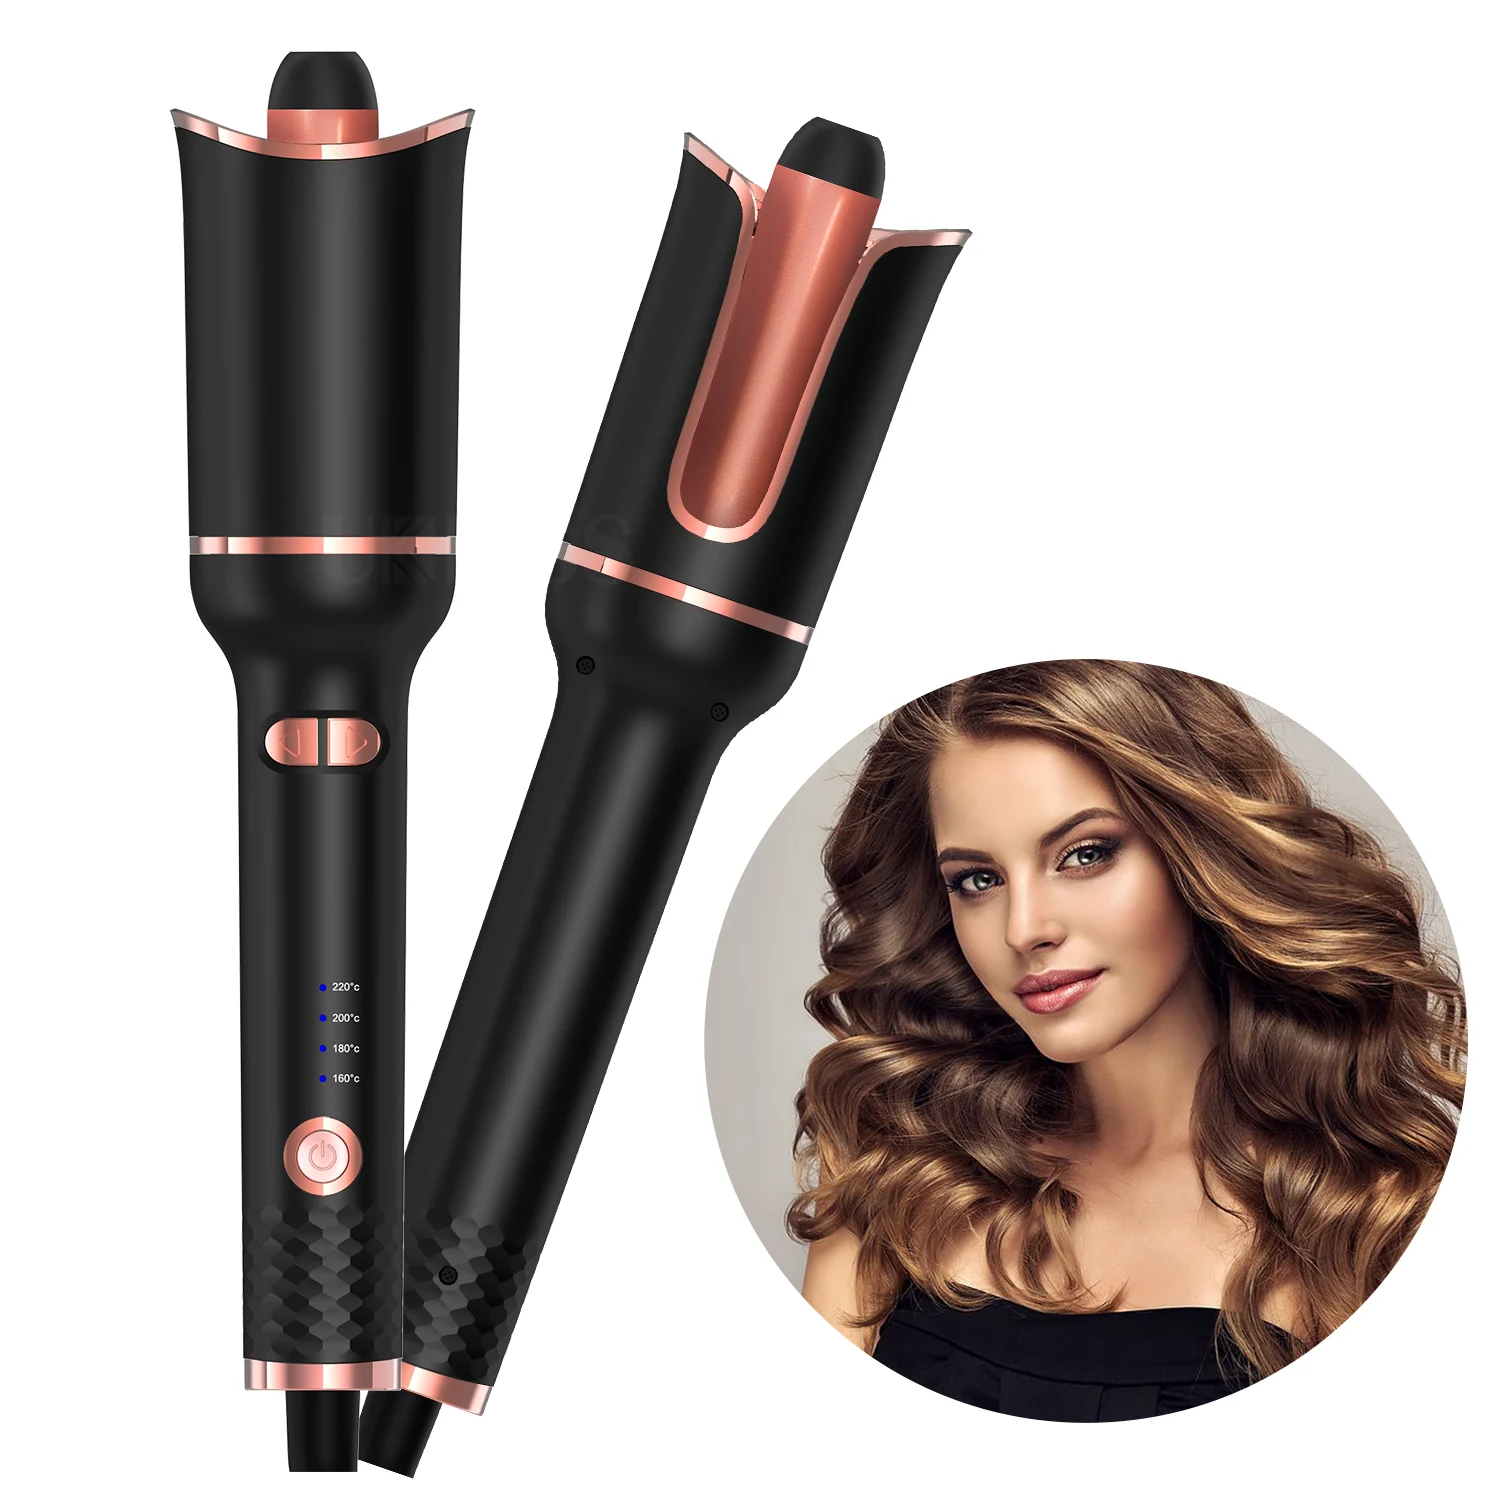 

Automatic Curling Iron Hair Curler Wave Formers Curler Hair Rollers 360 tourmaline ceramic Auto Rotating Hair Curler